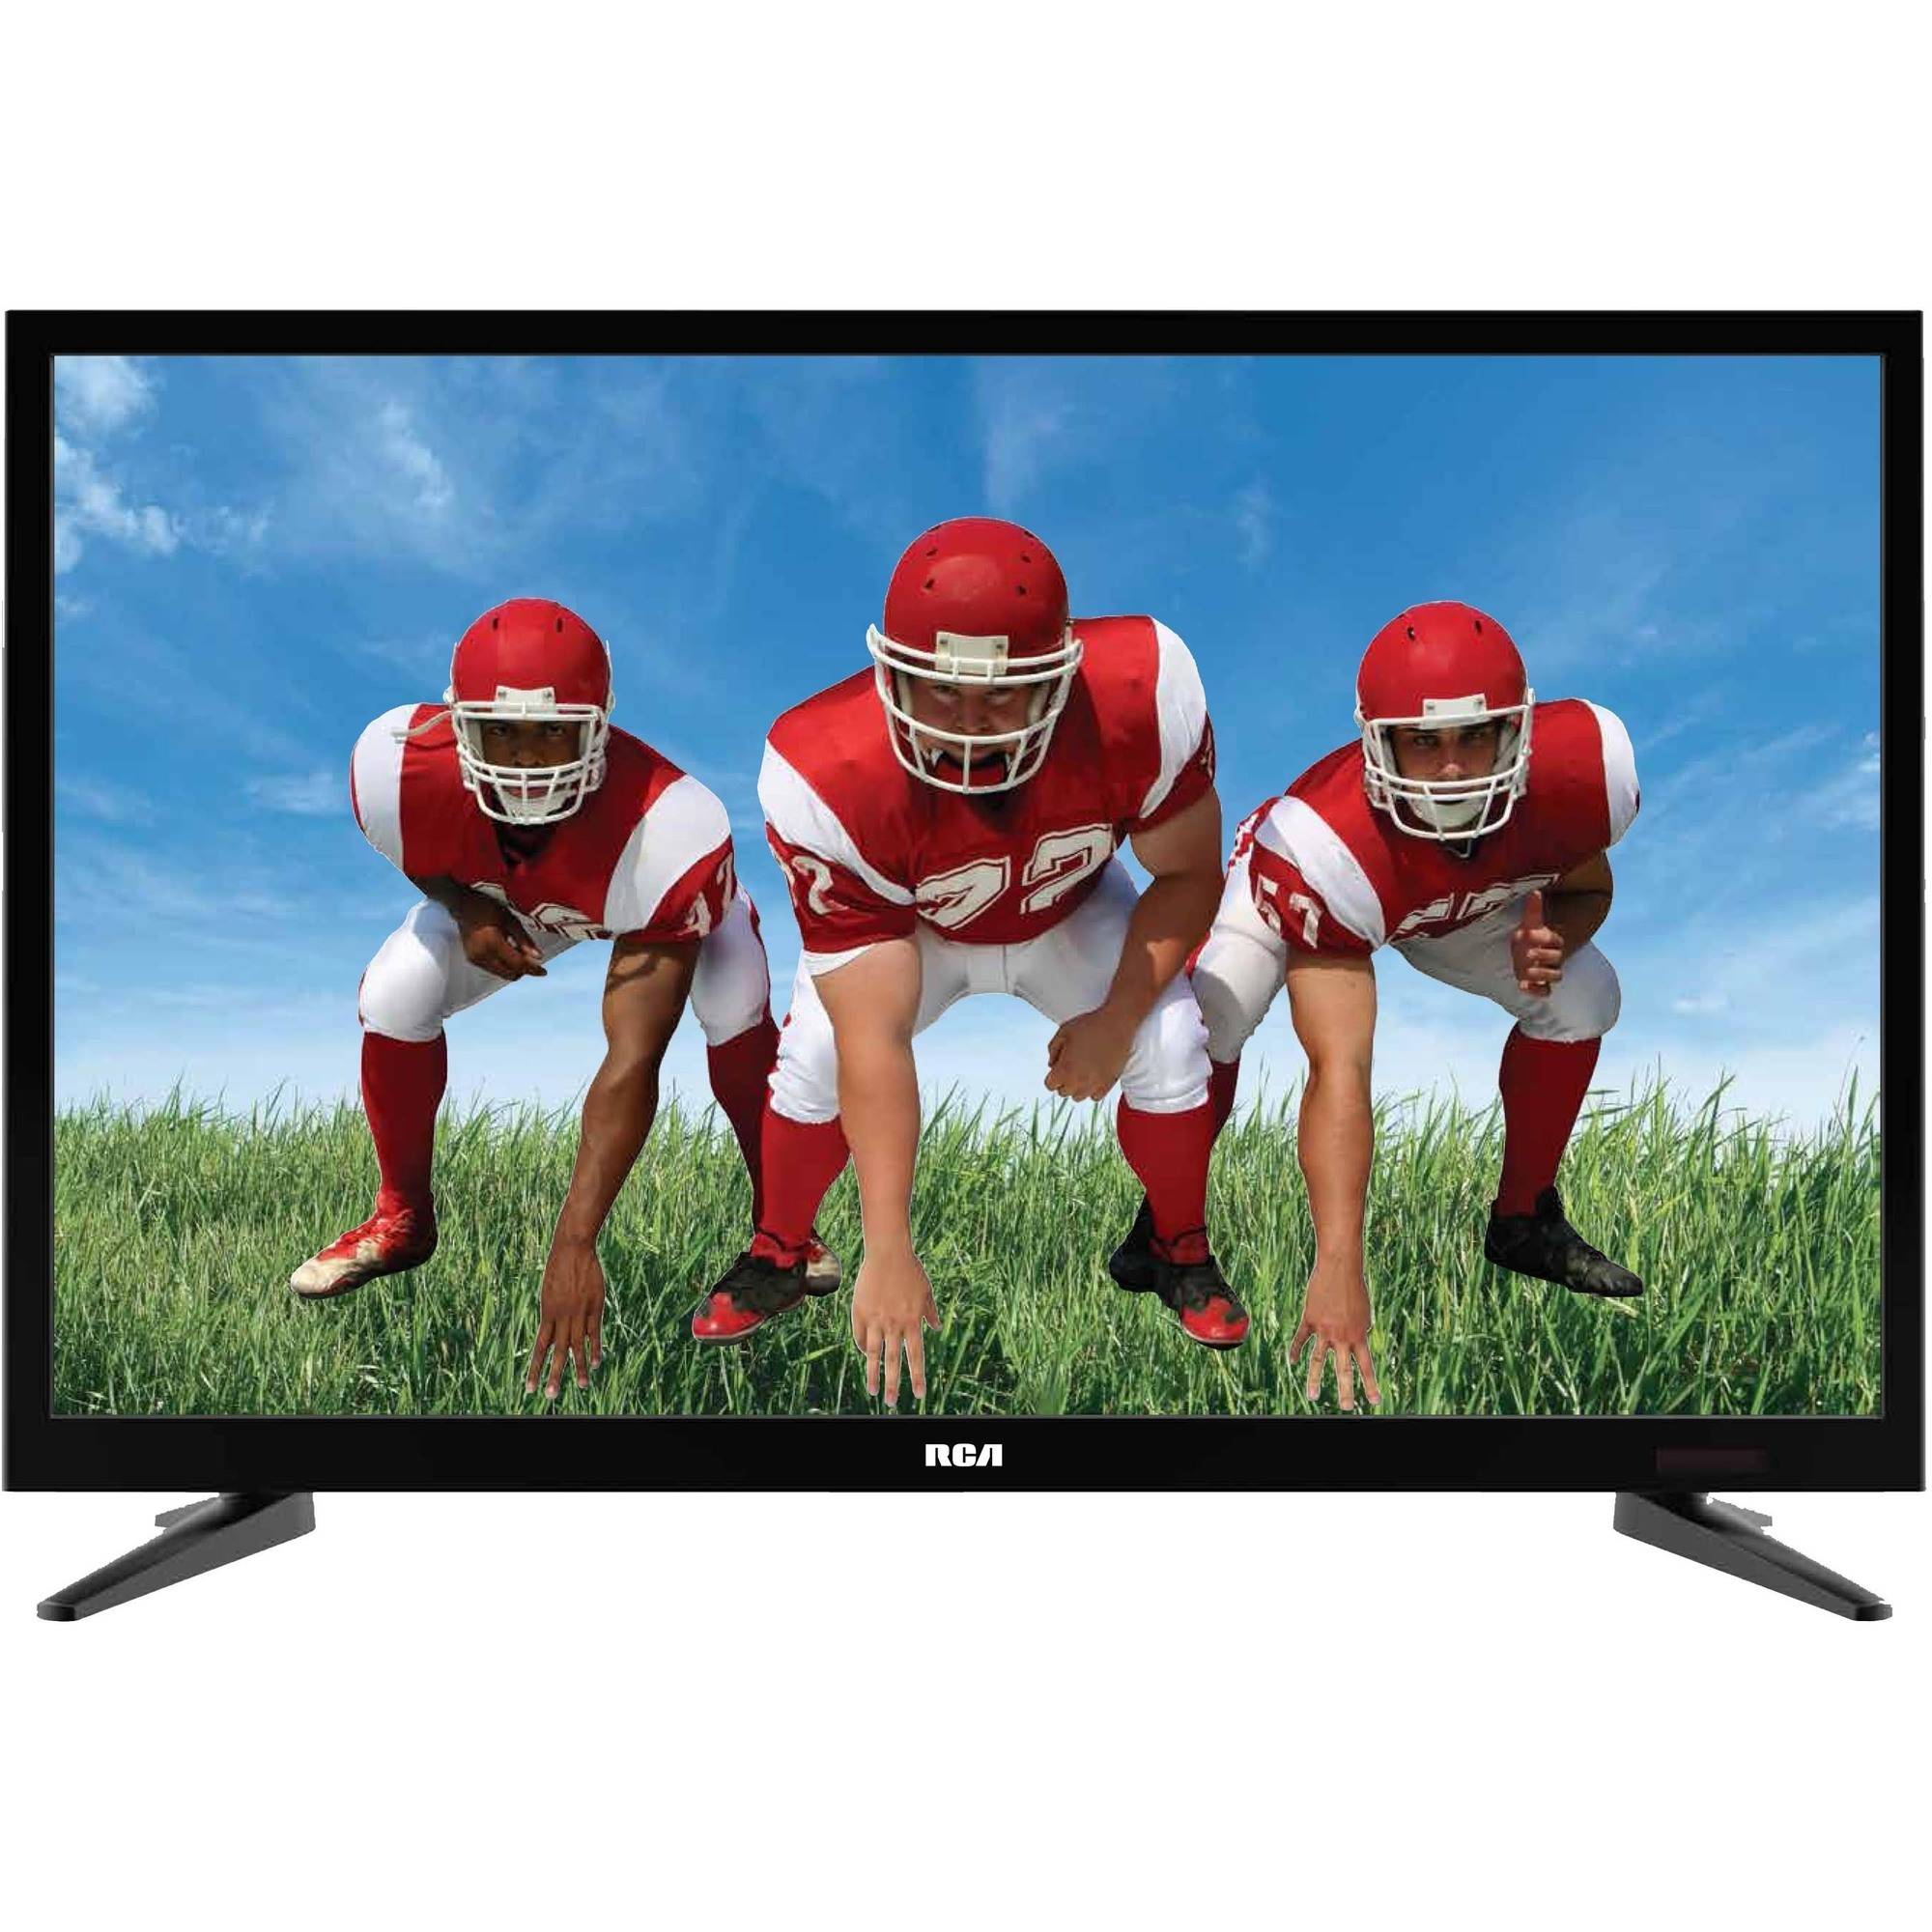 RCA 43″ 4K TV for $160, free shipping